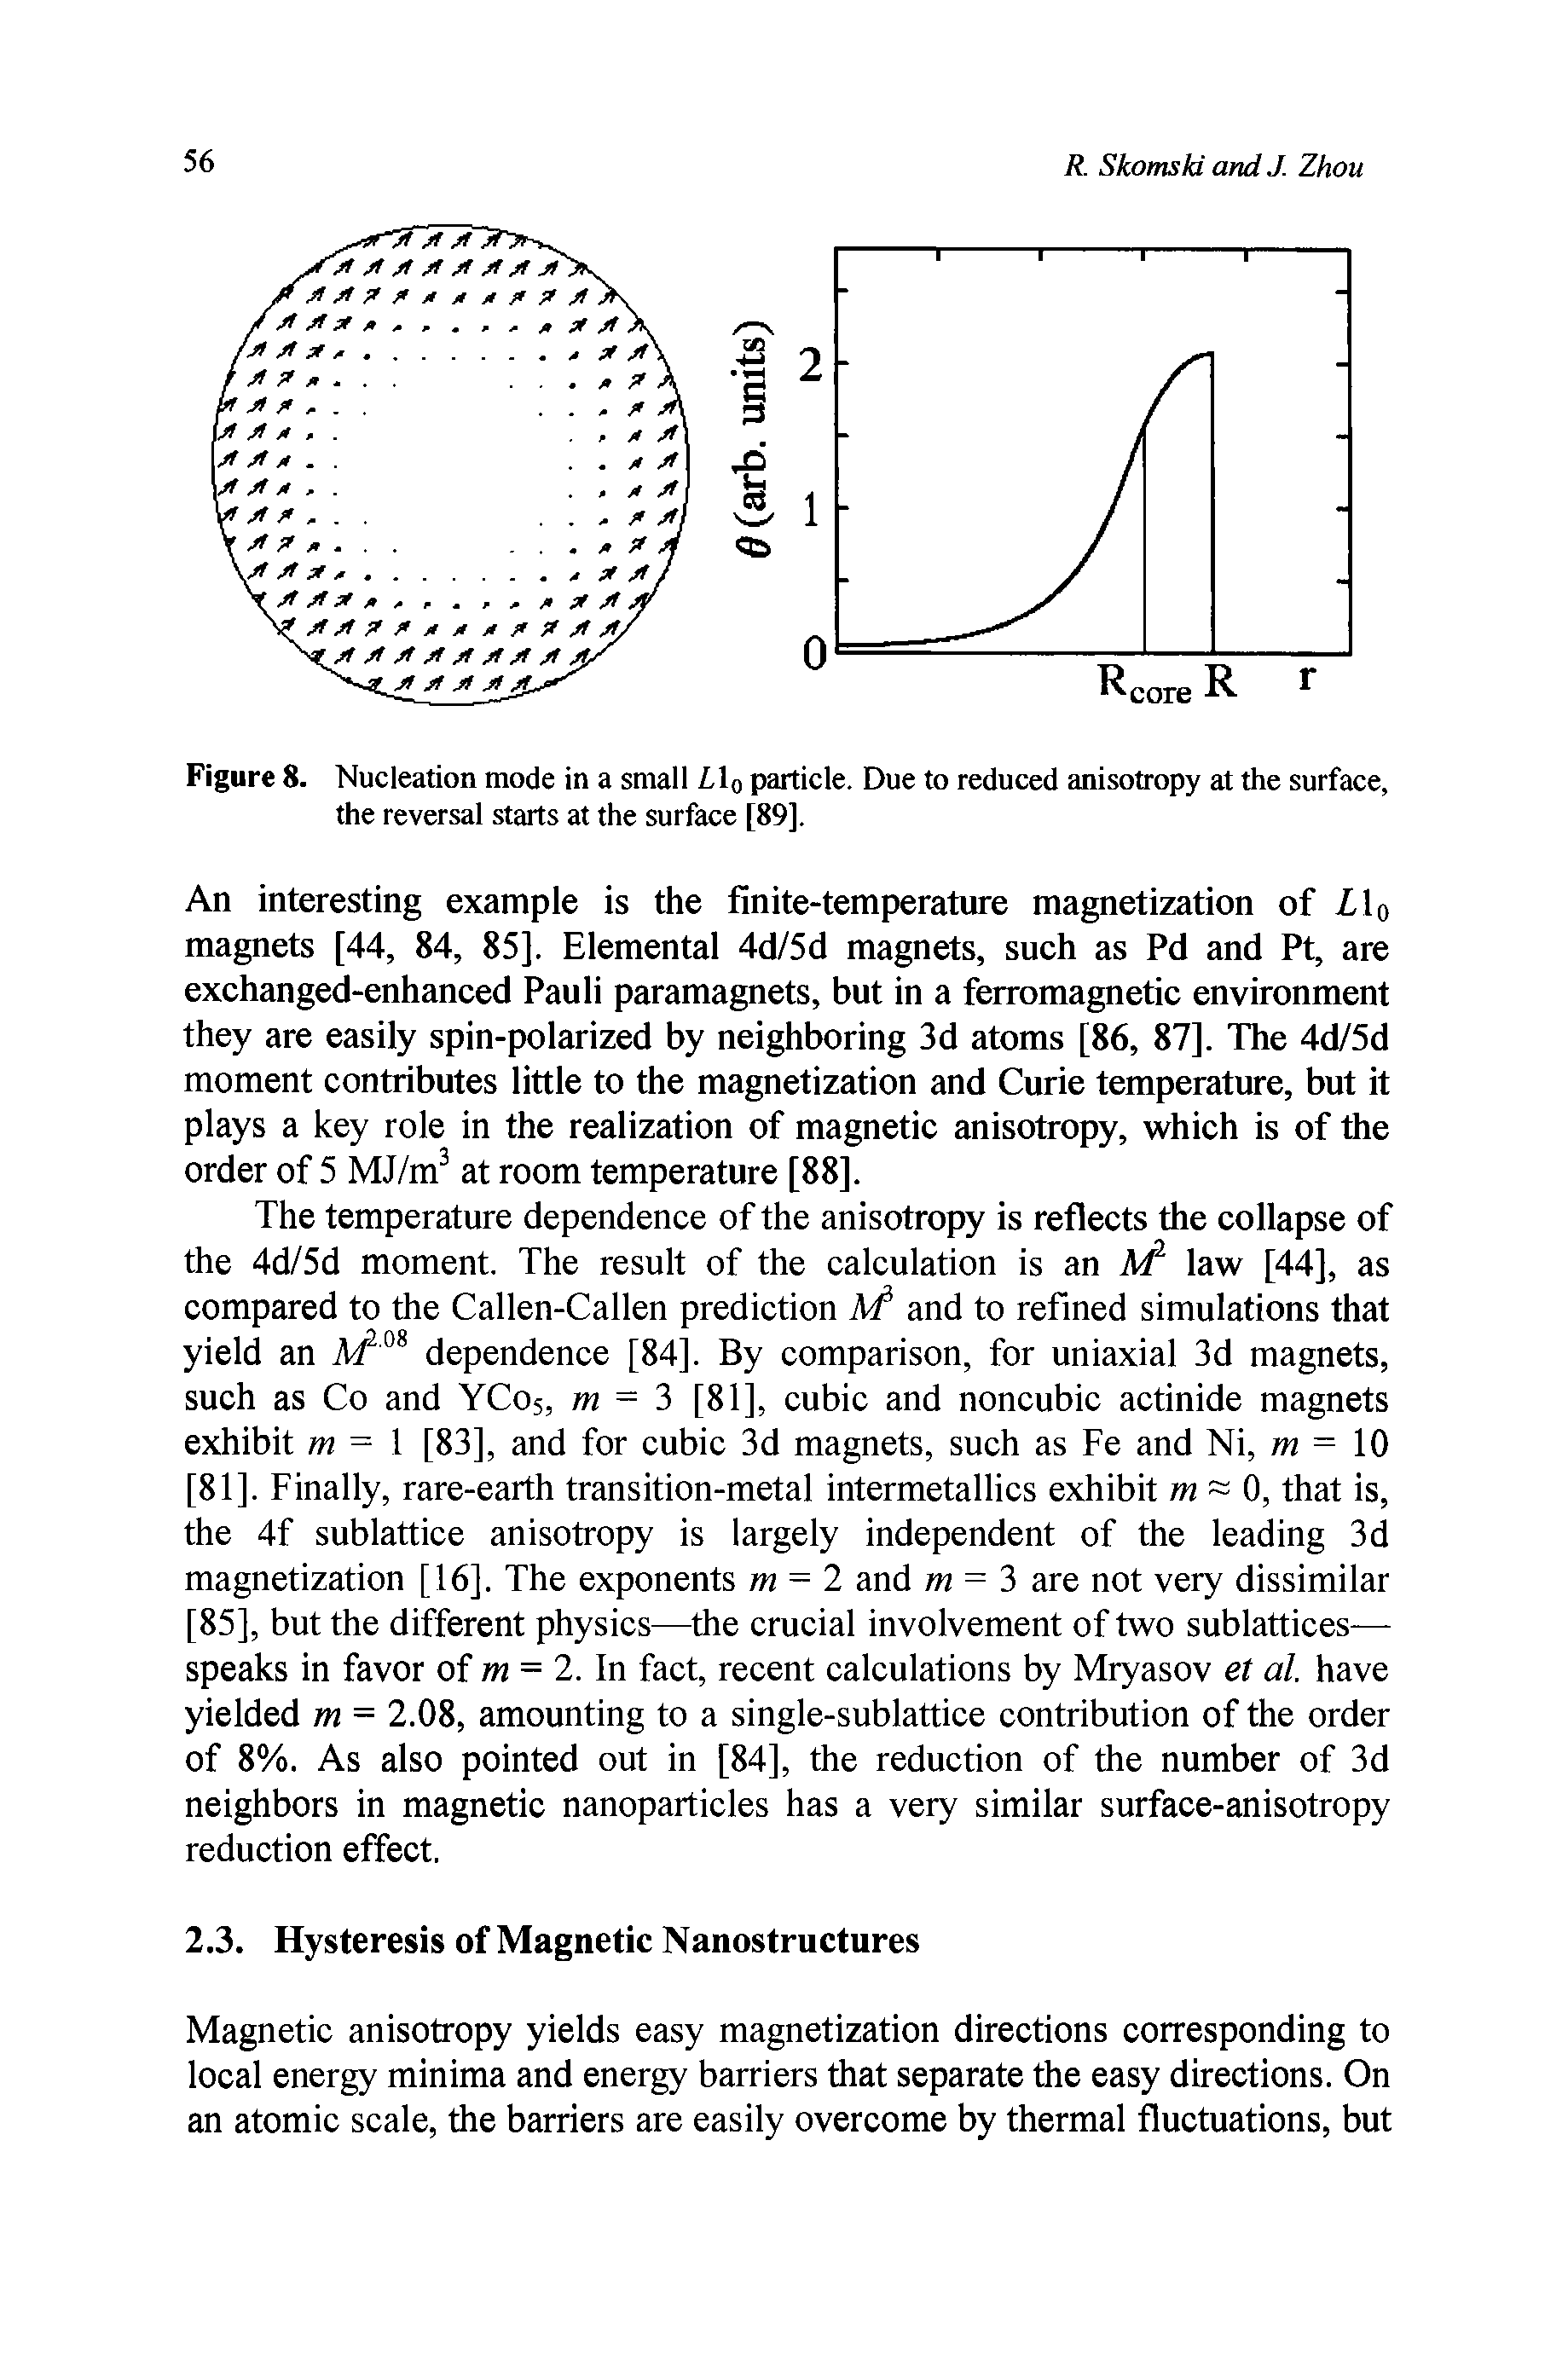 Figure 8. Nucleation mode in a small Z,l0 particle. Due to reduced anisotropy at the surface, the reversal starts at the surface [89],...